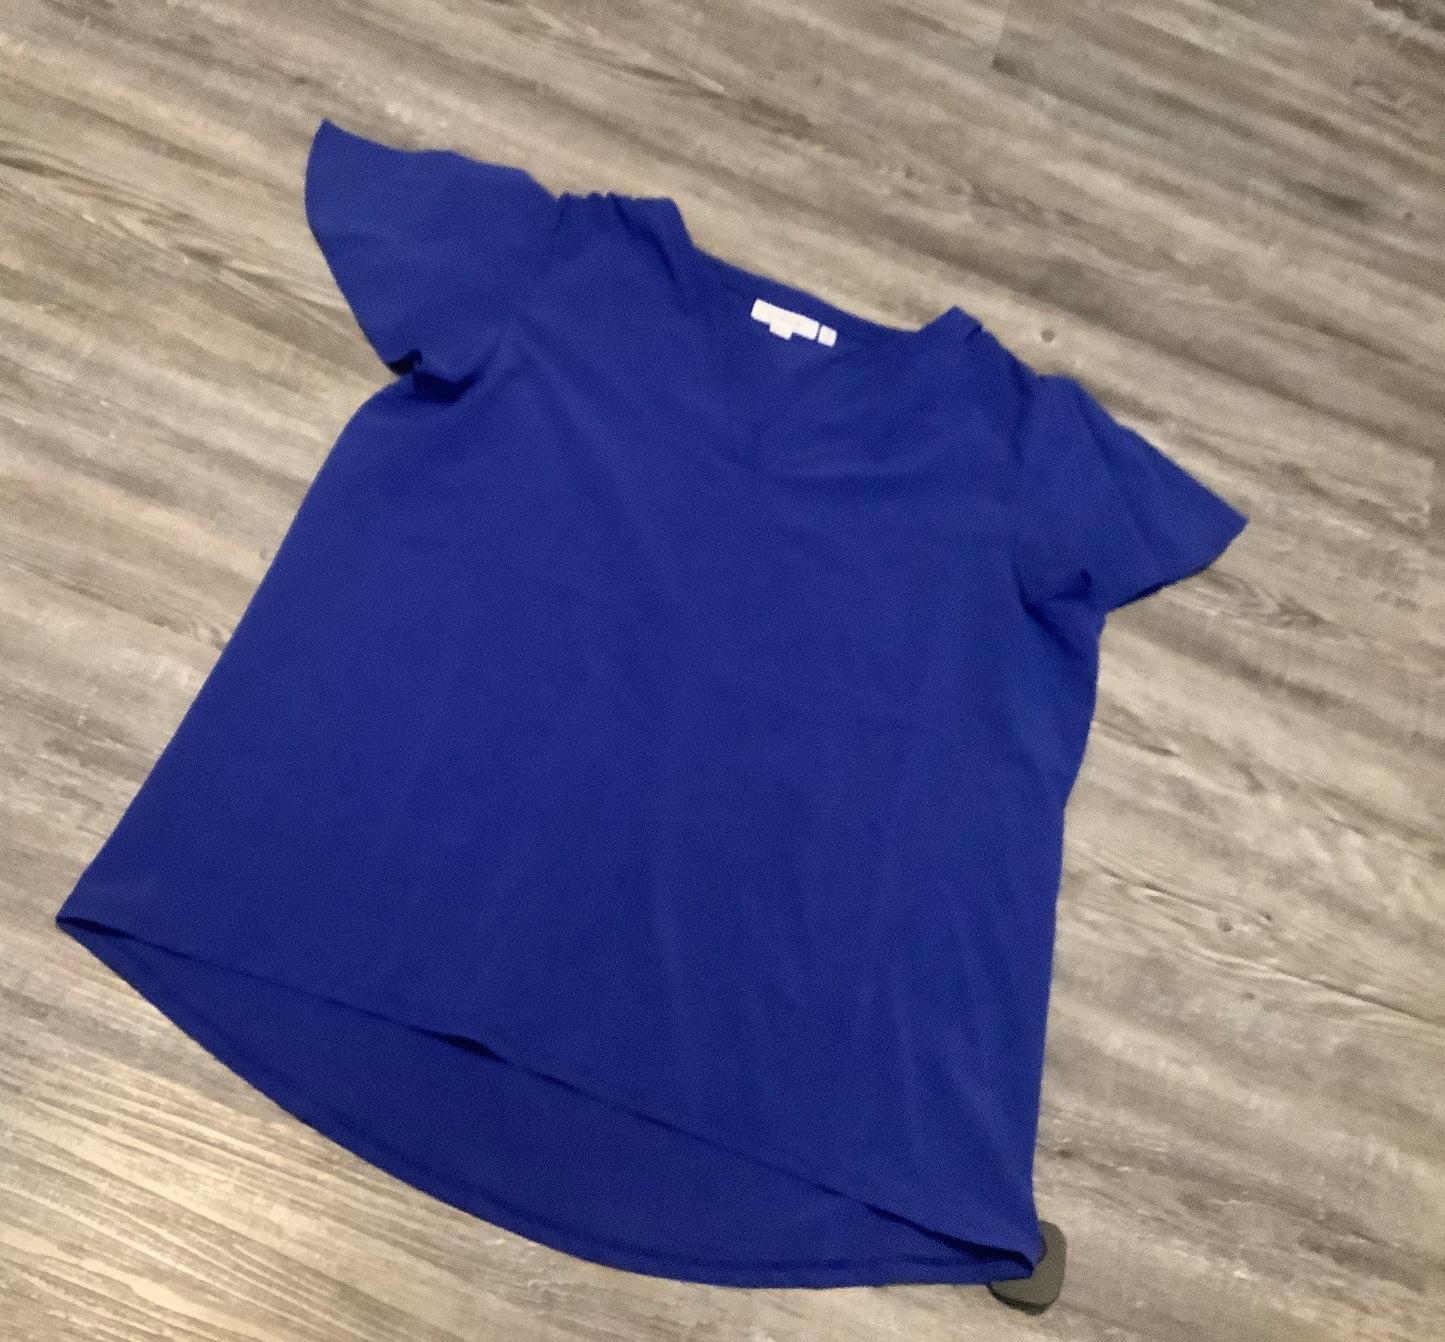 Blue Top Short Sleeve Chicos, Size 10